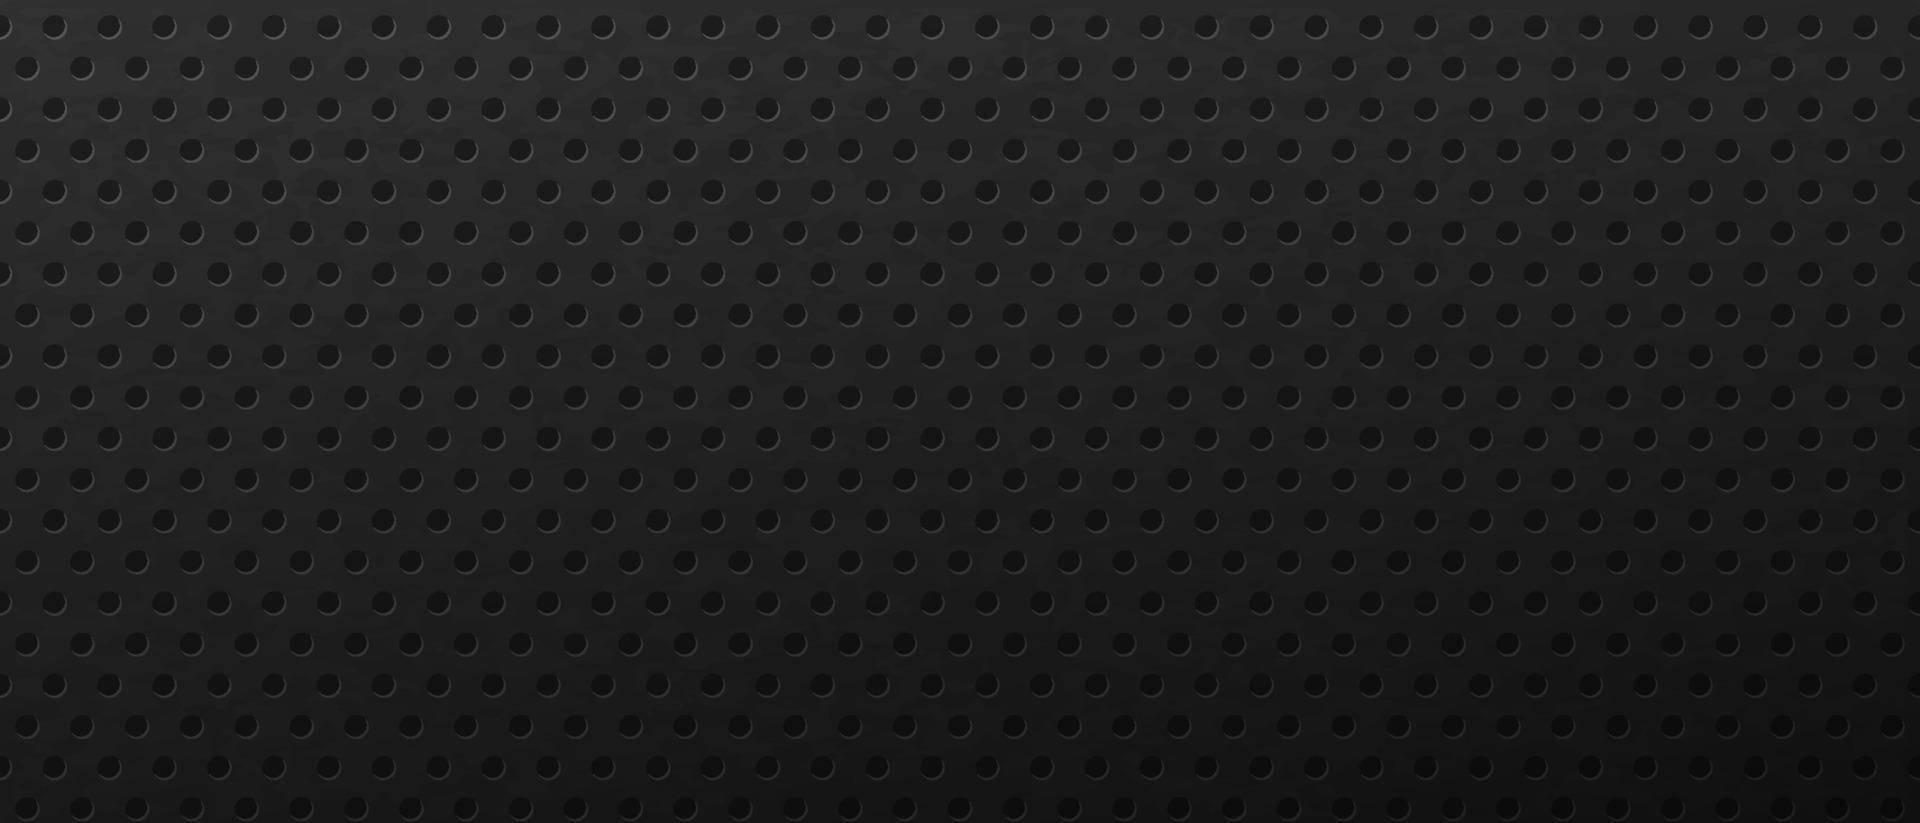 Metal industrial backdrop with round holes or dots. Modern black background design template with circular spots. Dark metallic perforated plate. Modern monochrome vector illustration for decoration.